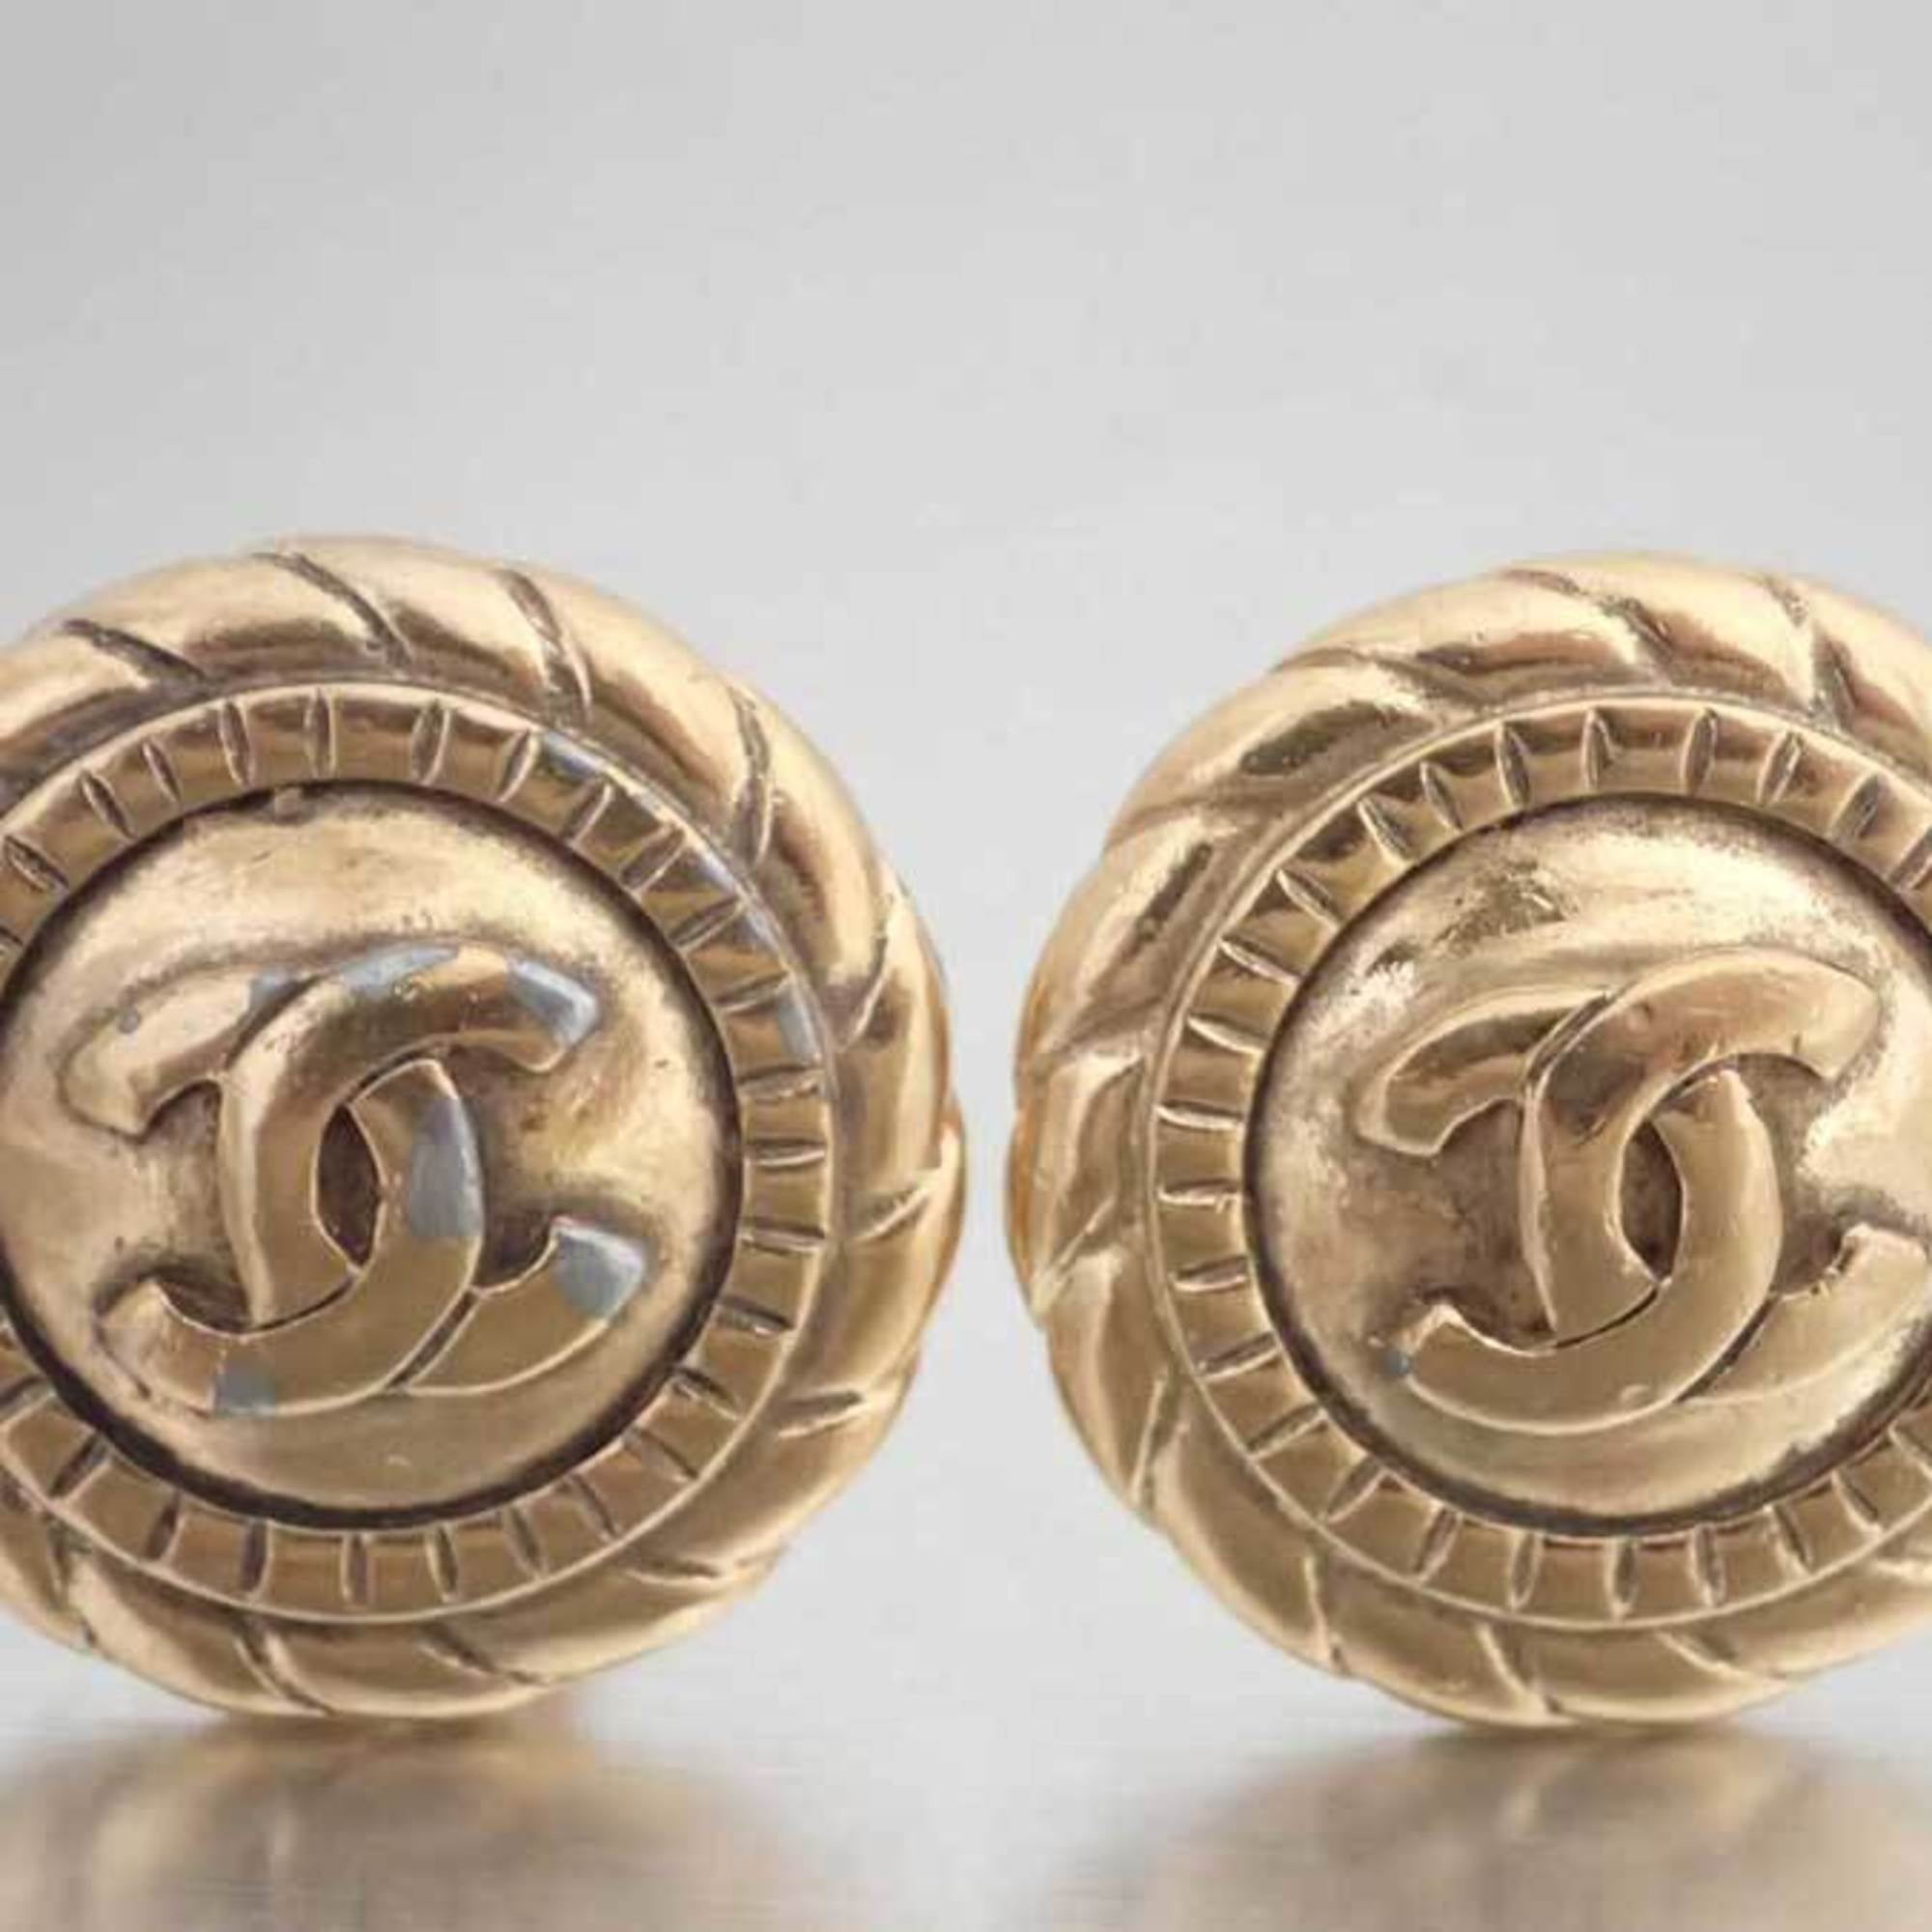 Authenticated Used Chanel CHANEL earrings here mark gold metal